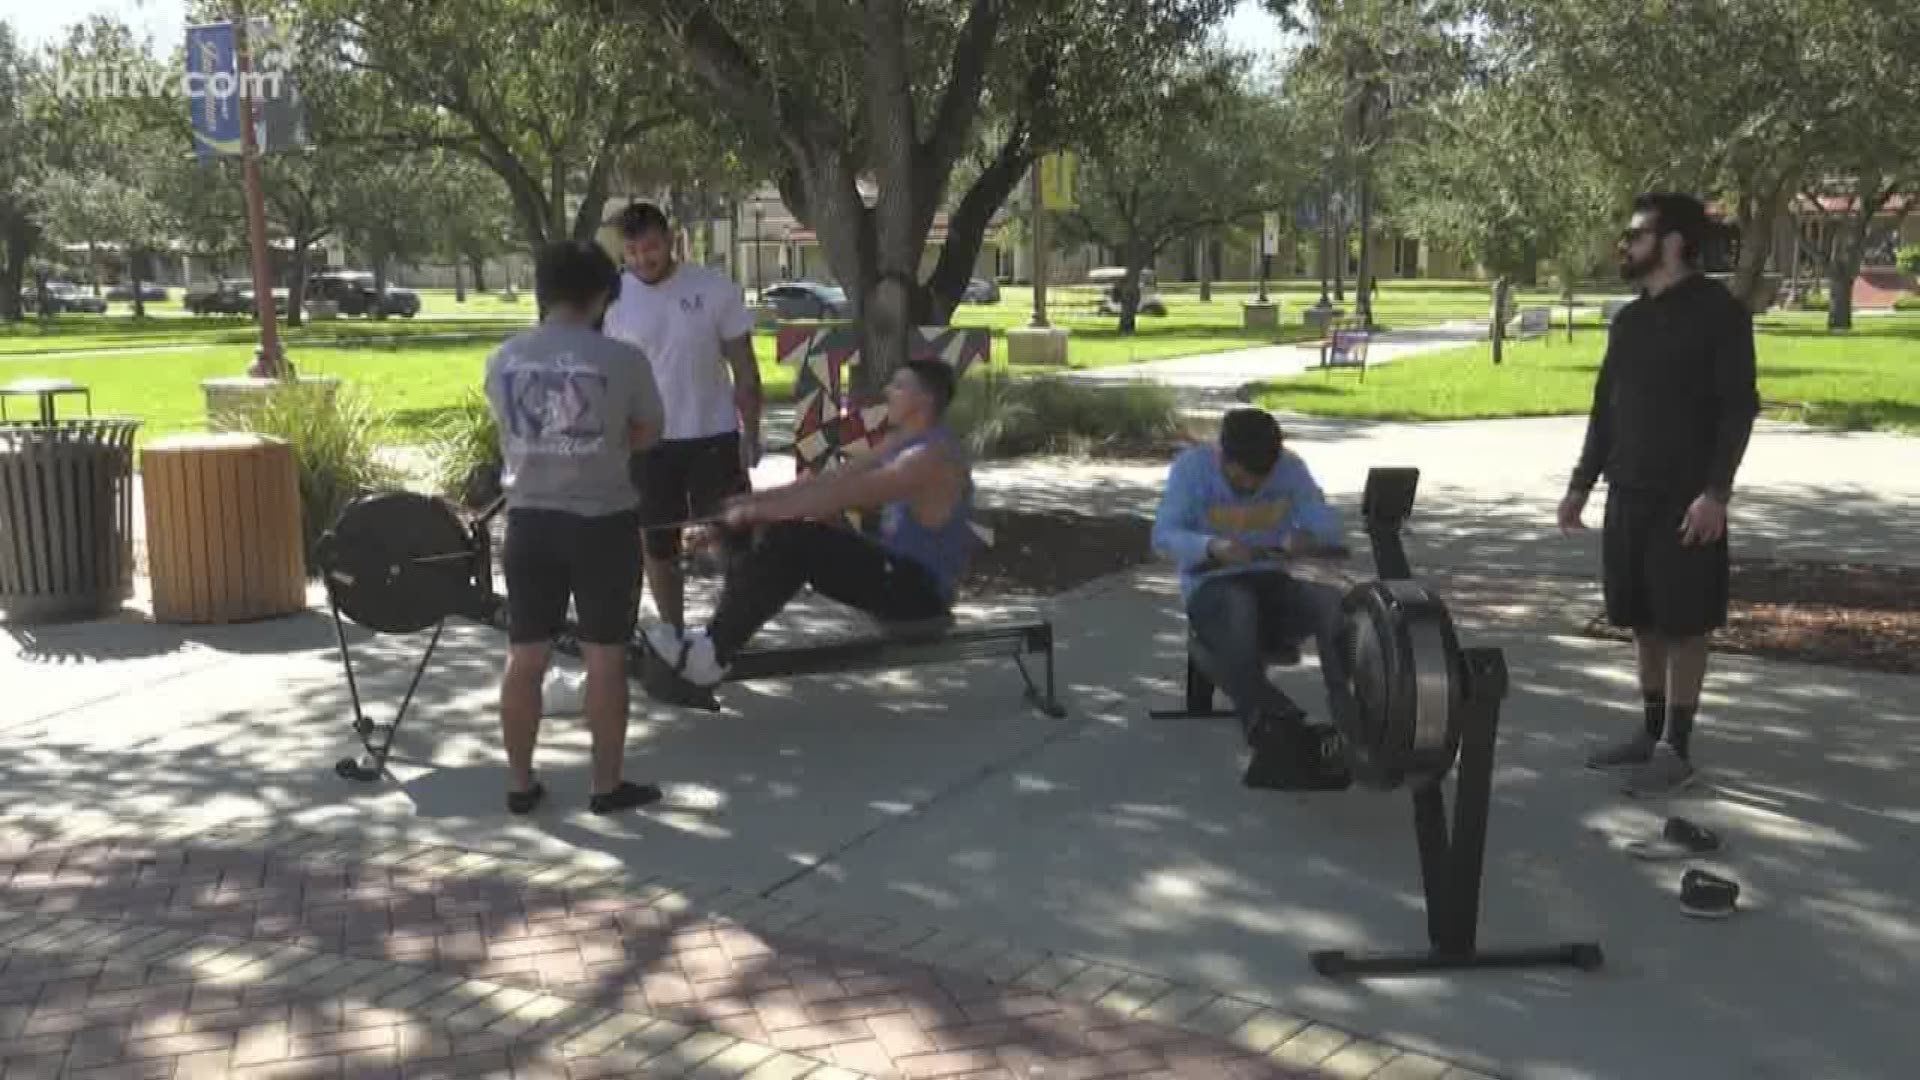 A Texas A&M University-Kingsville fraternity wants to give back to veterans in a unique way -- rowing.